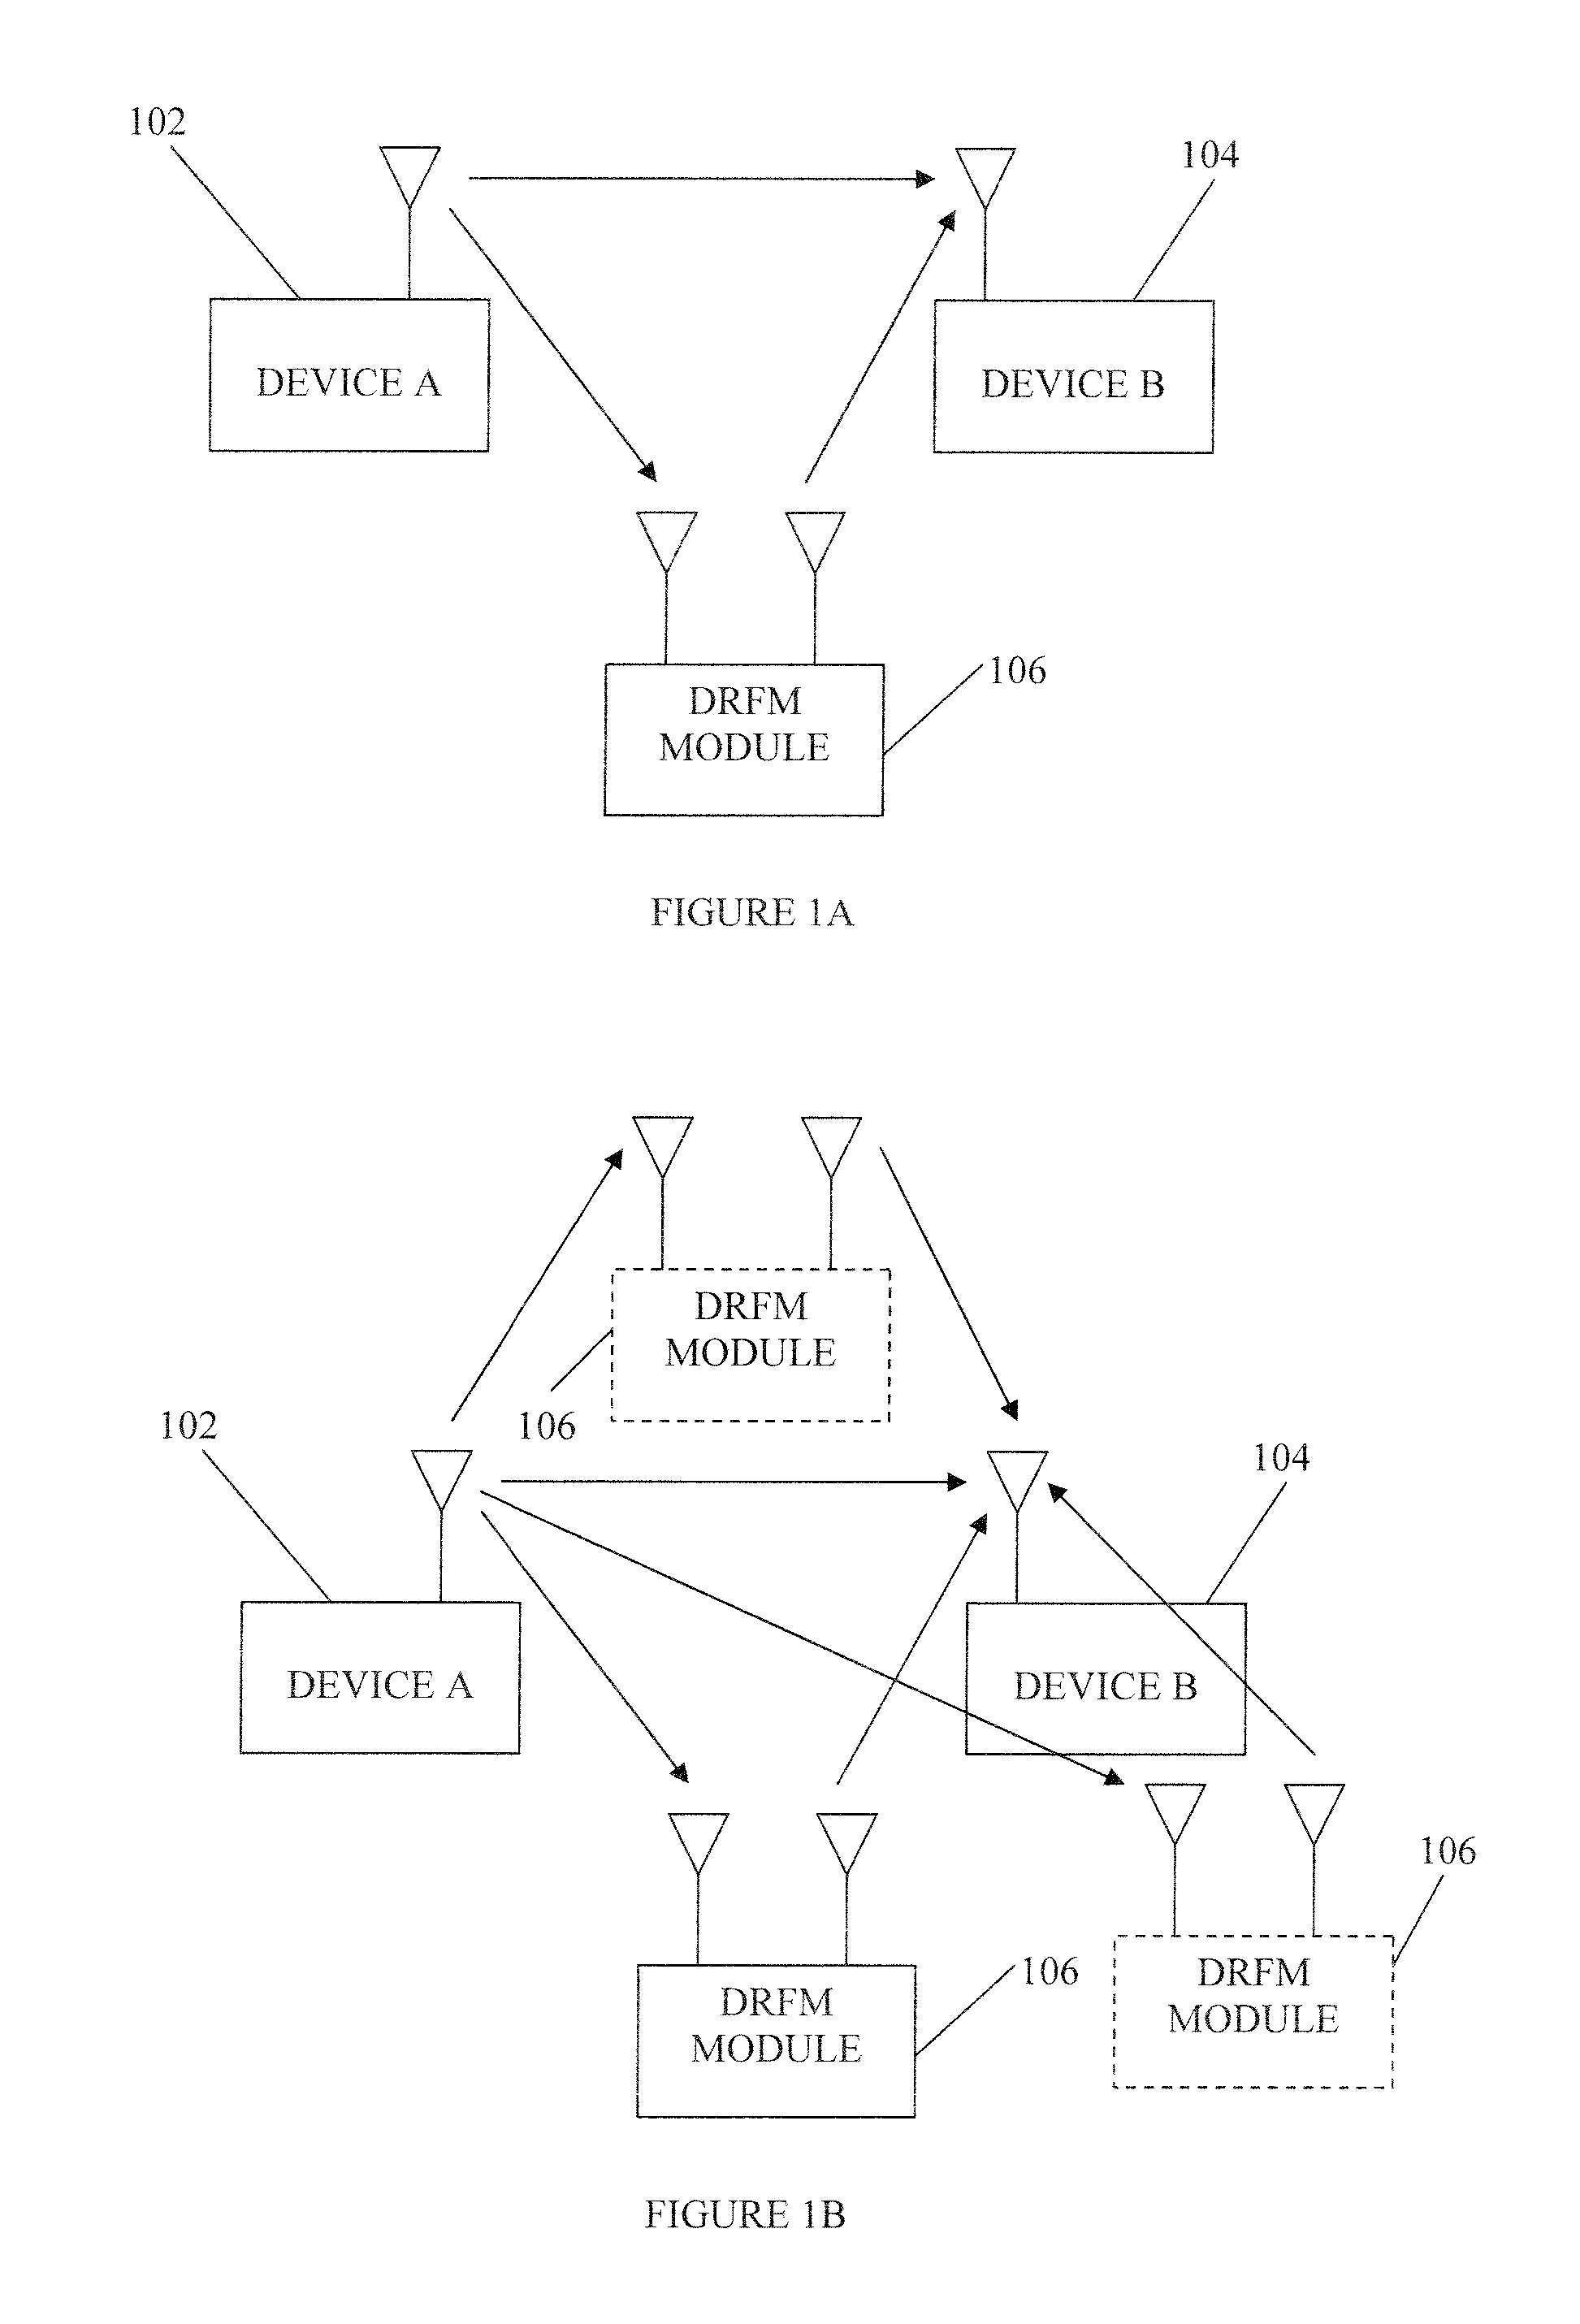 Simultaneous communications jamming and enabling on a same frequency band